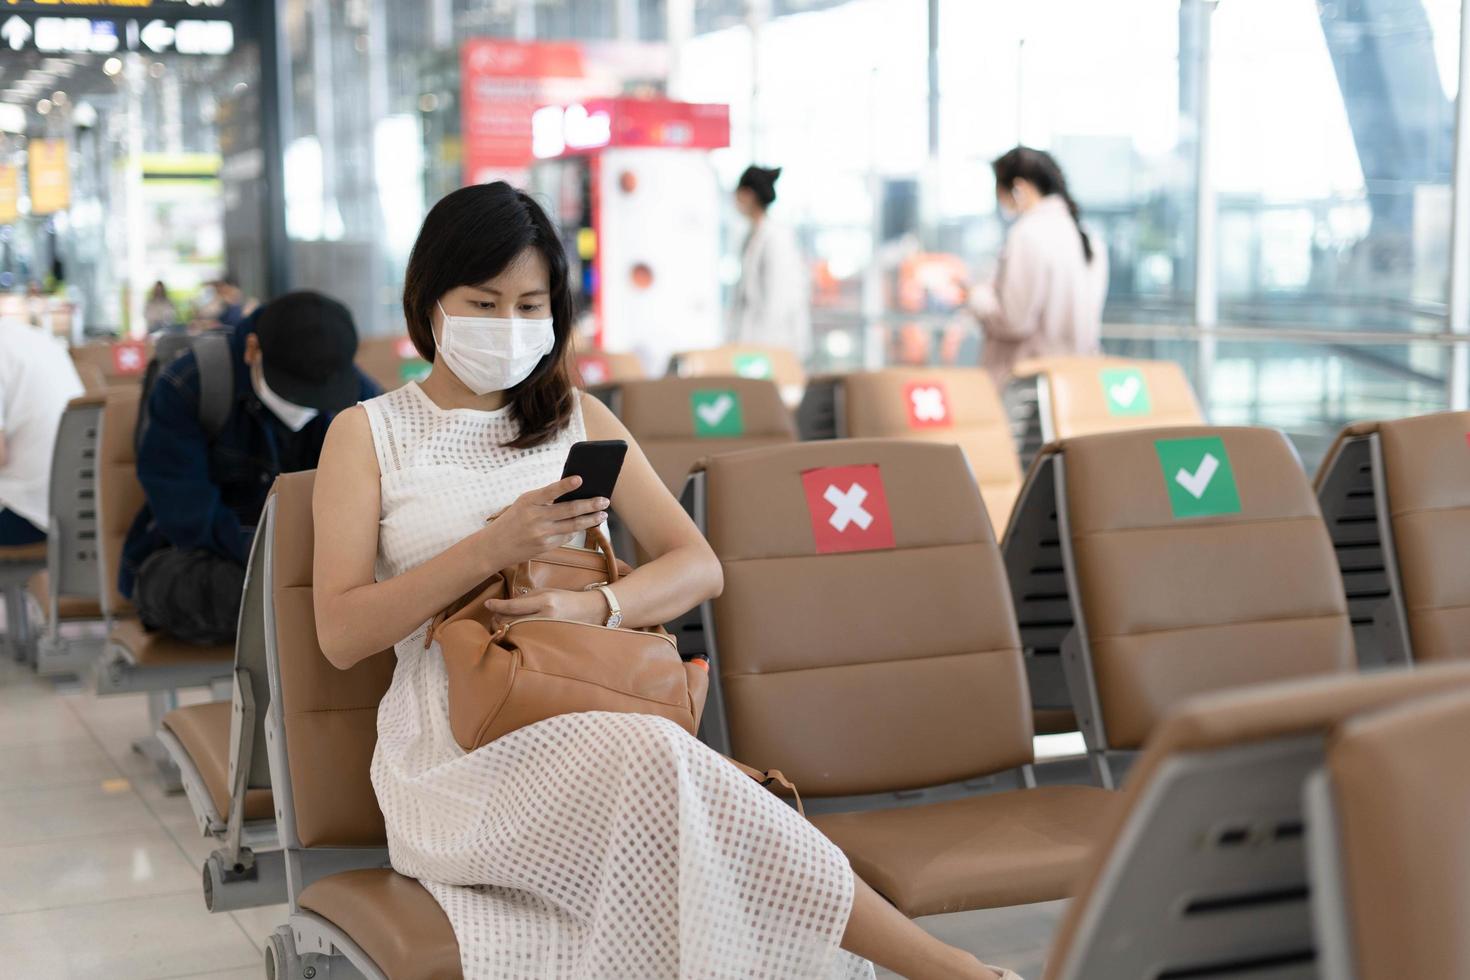 Asian women wear a mask and sit between chairs to reduce the spread of the coronavirus. Tourists wait to get on planes during the covid-19 outbreak. photo